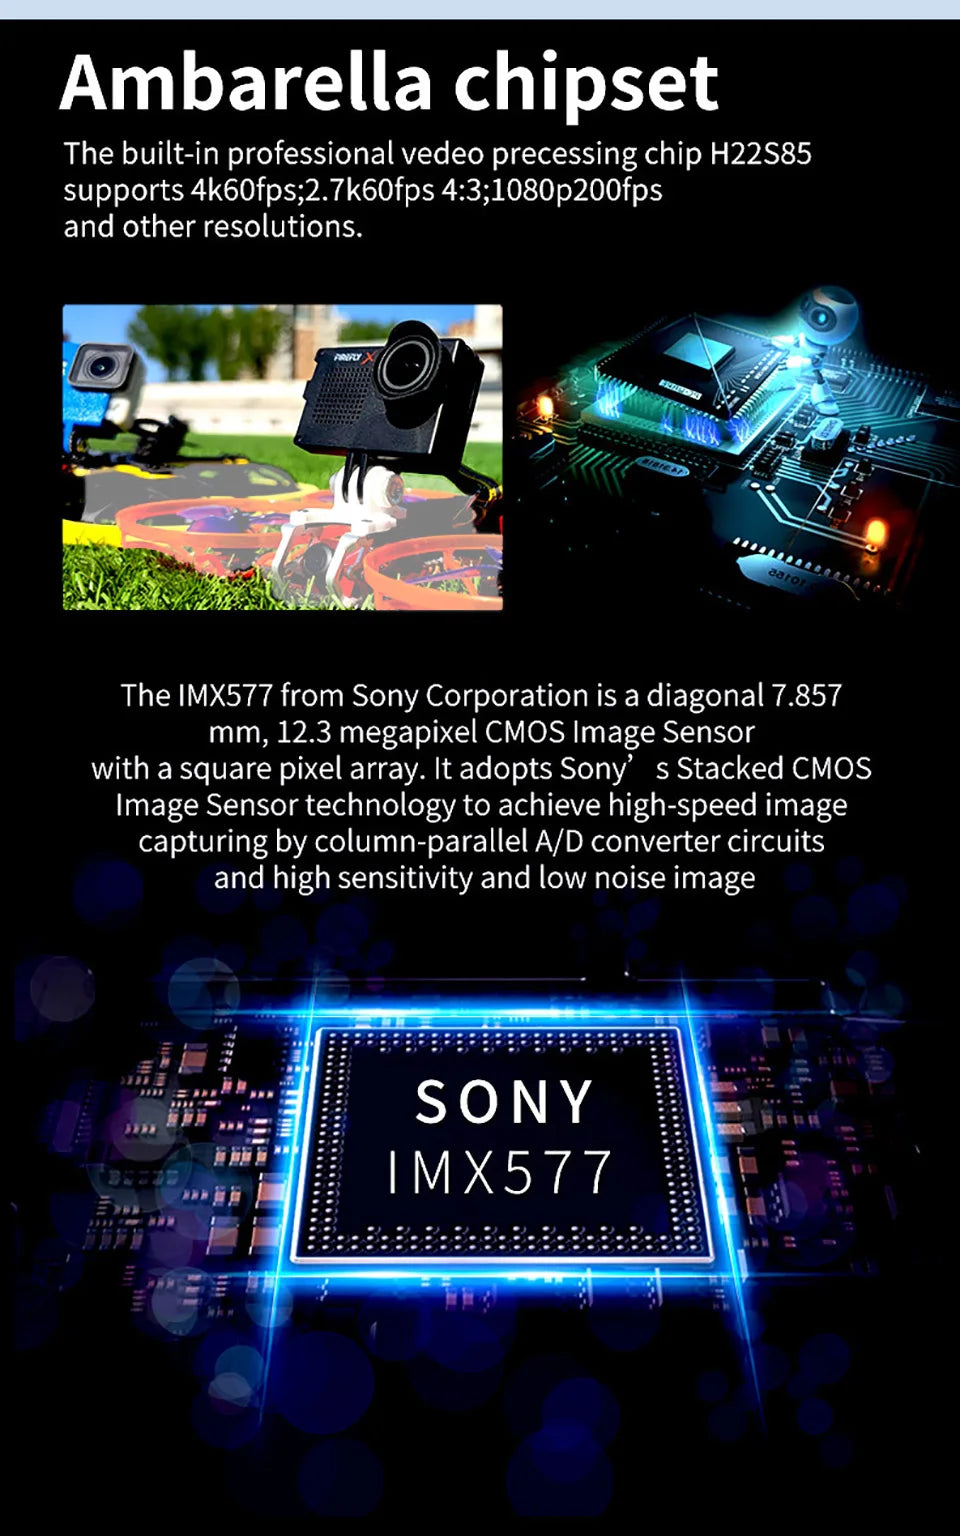 Hawkeye Firefly X LITE II 4K Naked Camera, the IMX577 from Sony Corporation is a diagonal 7.857 mm,